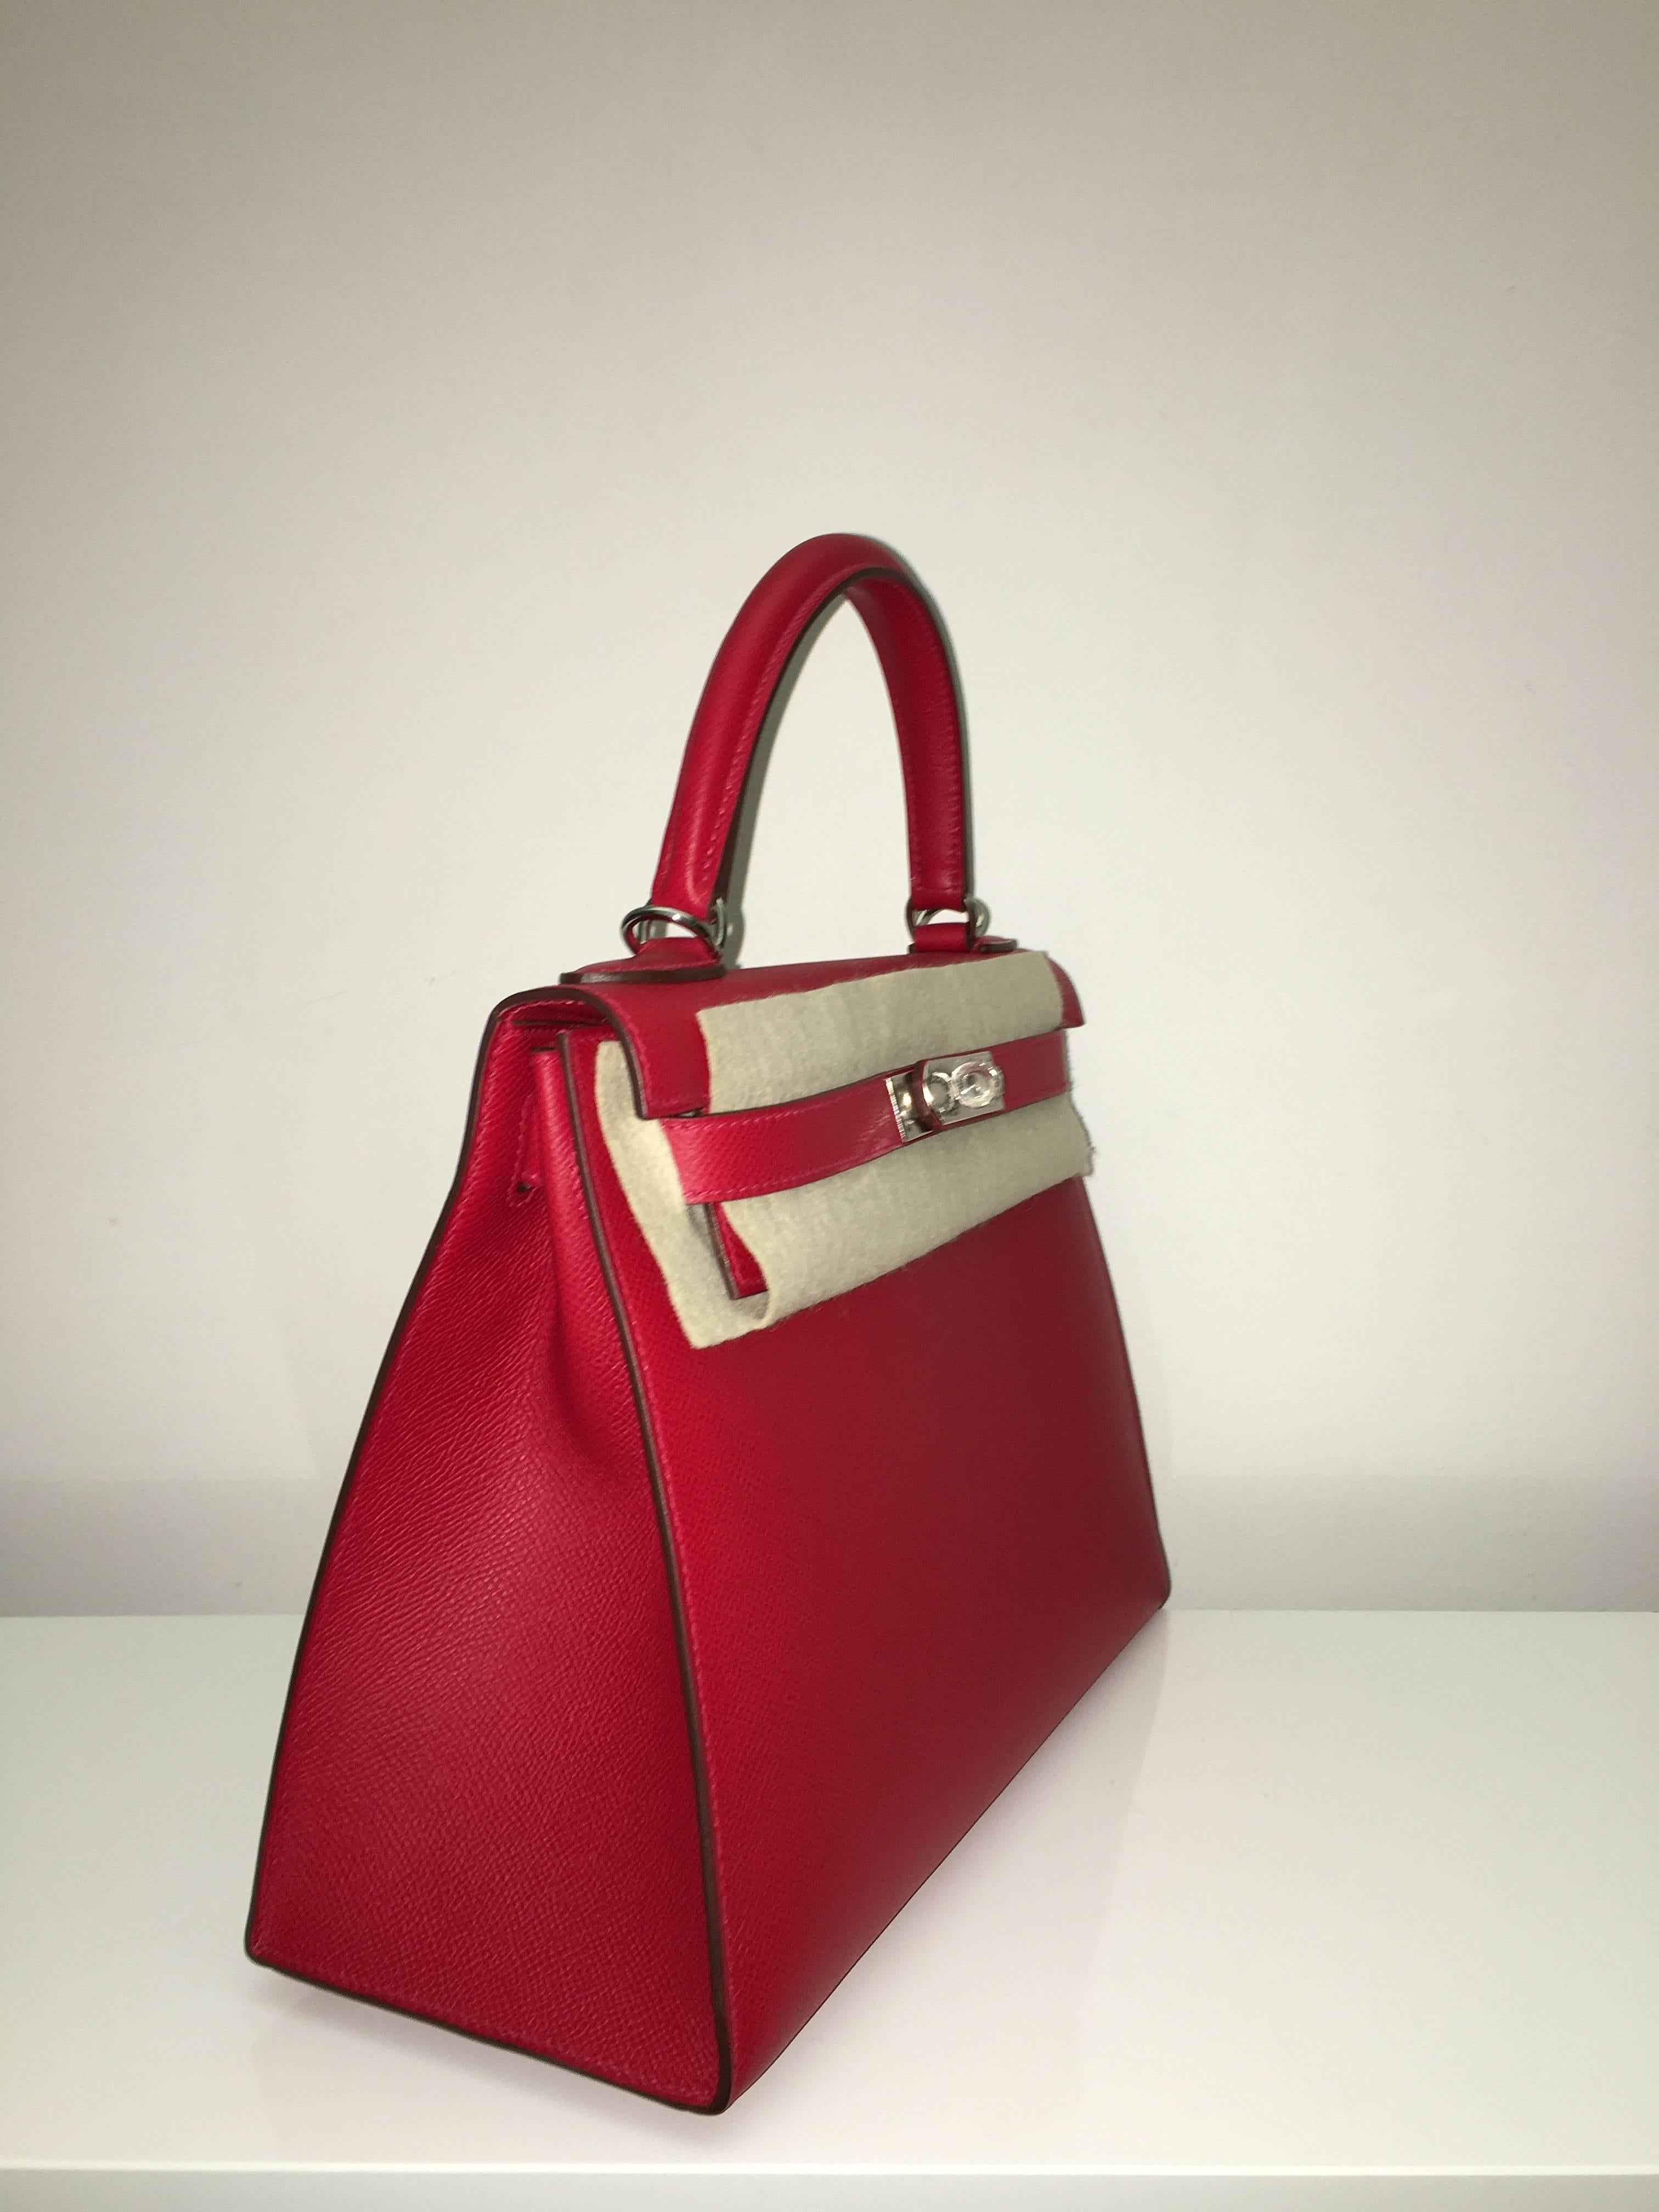 Hermes 
Kelly Size 28
Epsom Leather 
Colour Rouge Casak
Palladium (silver) Hardware 
store fresh, comes with receipt and full set (dust bag, box...) 
Hydeparkfashion specializes in sourcing and delivering authentic luxury handbags, mainly